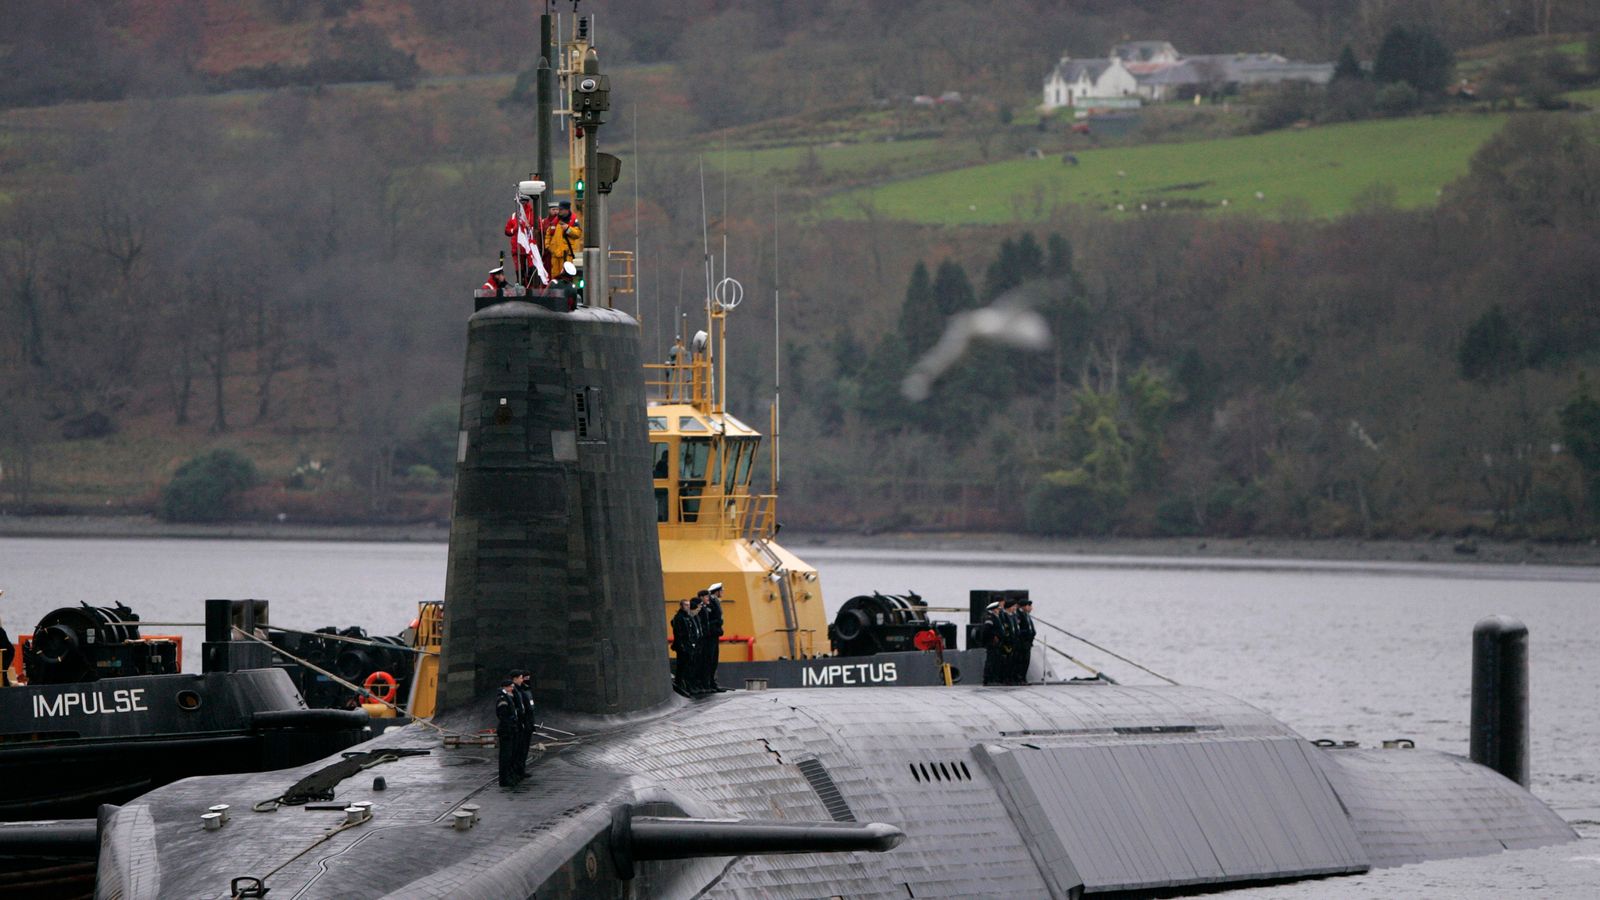 Head of Royal Navy orders investigation into 'abhorrent' claim of 'sexual bullying' in submarine service